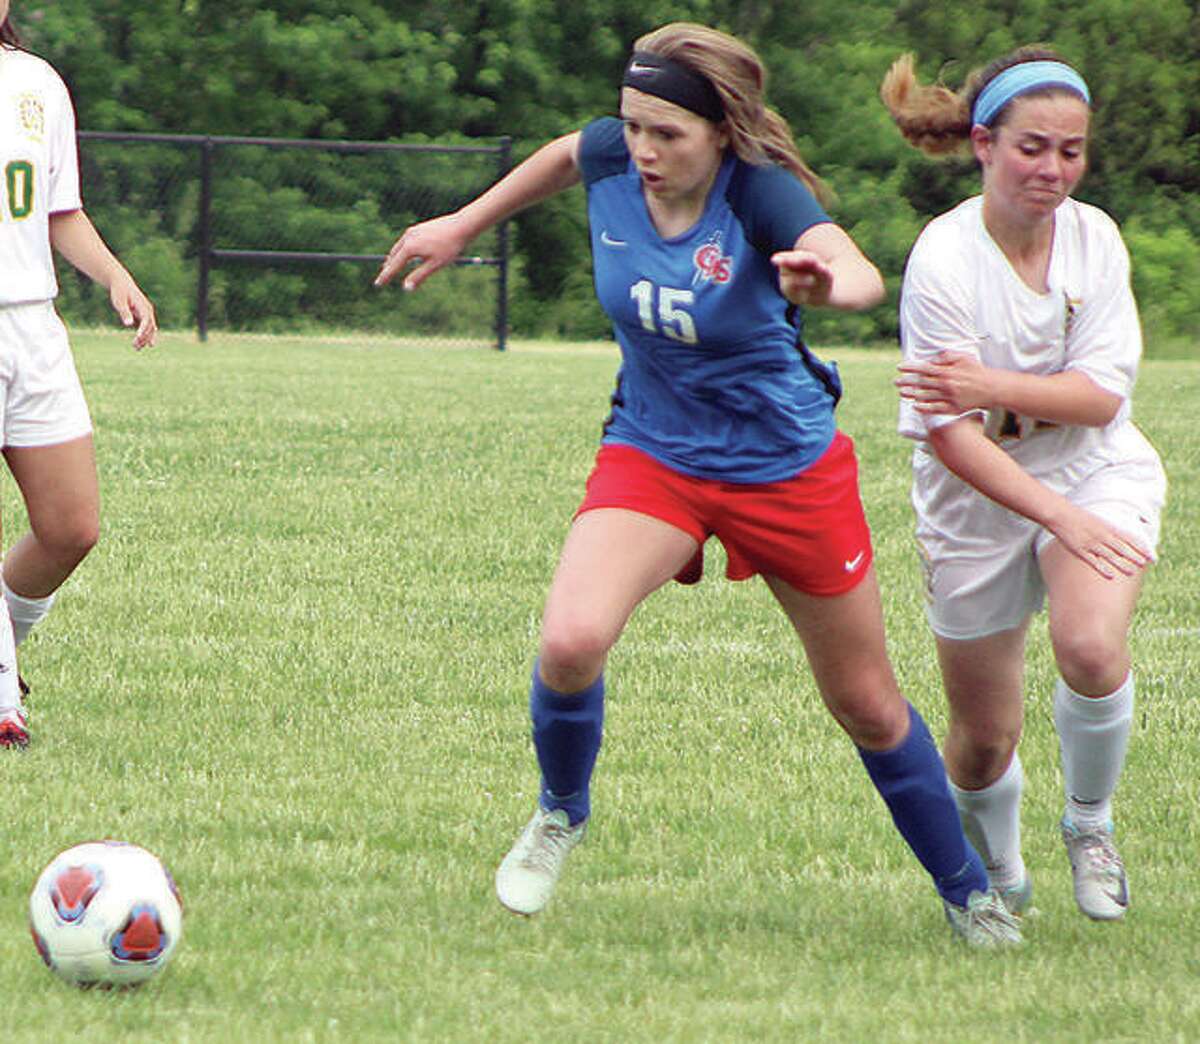 Gracie Reels (15) of Carlinville outraces a St. Thomas More player during the 2018 Class A Sectional final in Decatur. Reels, a three-sport standout at Carlinville, saw her senior season end prematurely when she tore an ACL early in the spring soccer season.